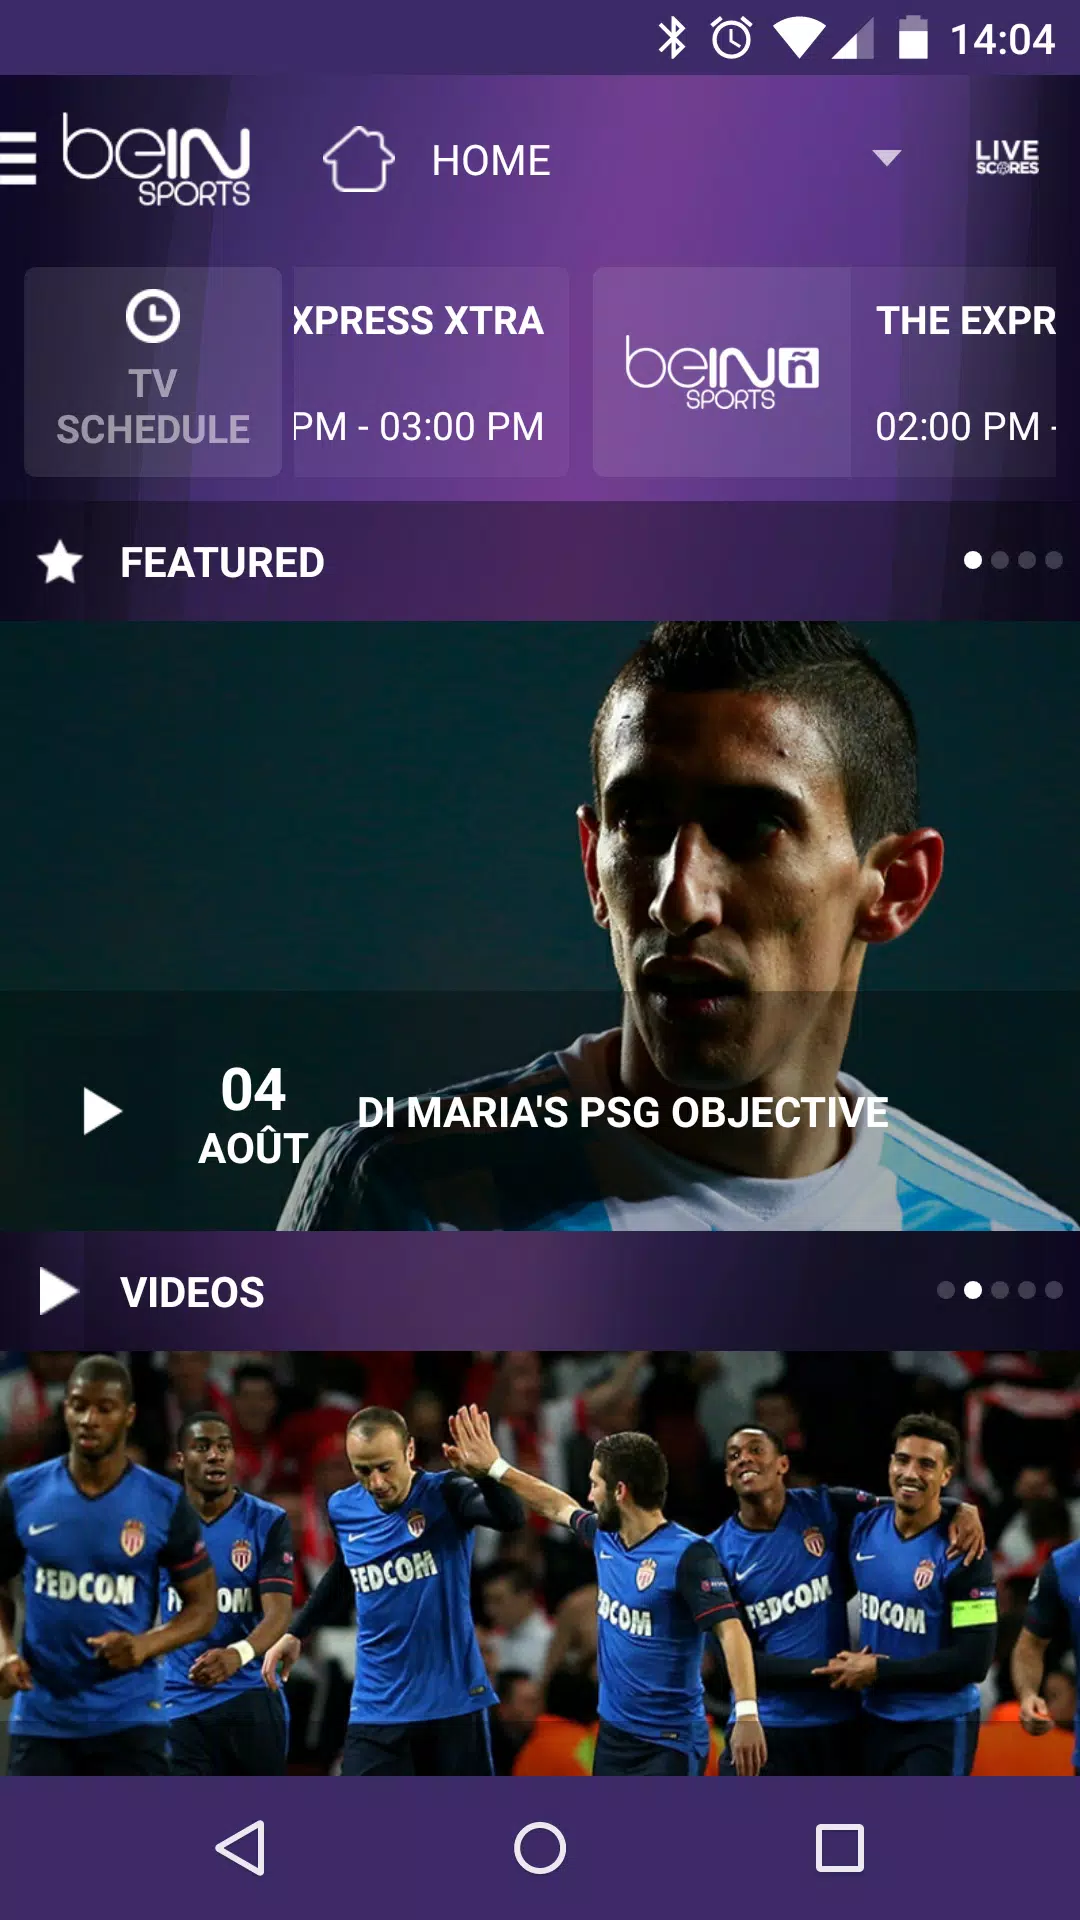 beIN SPORTS for Android - APK Download